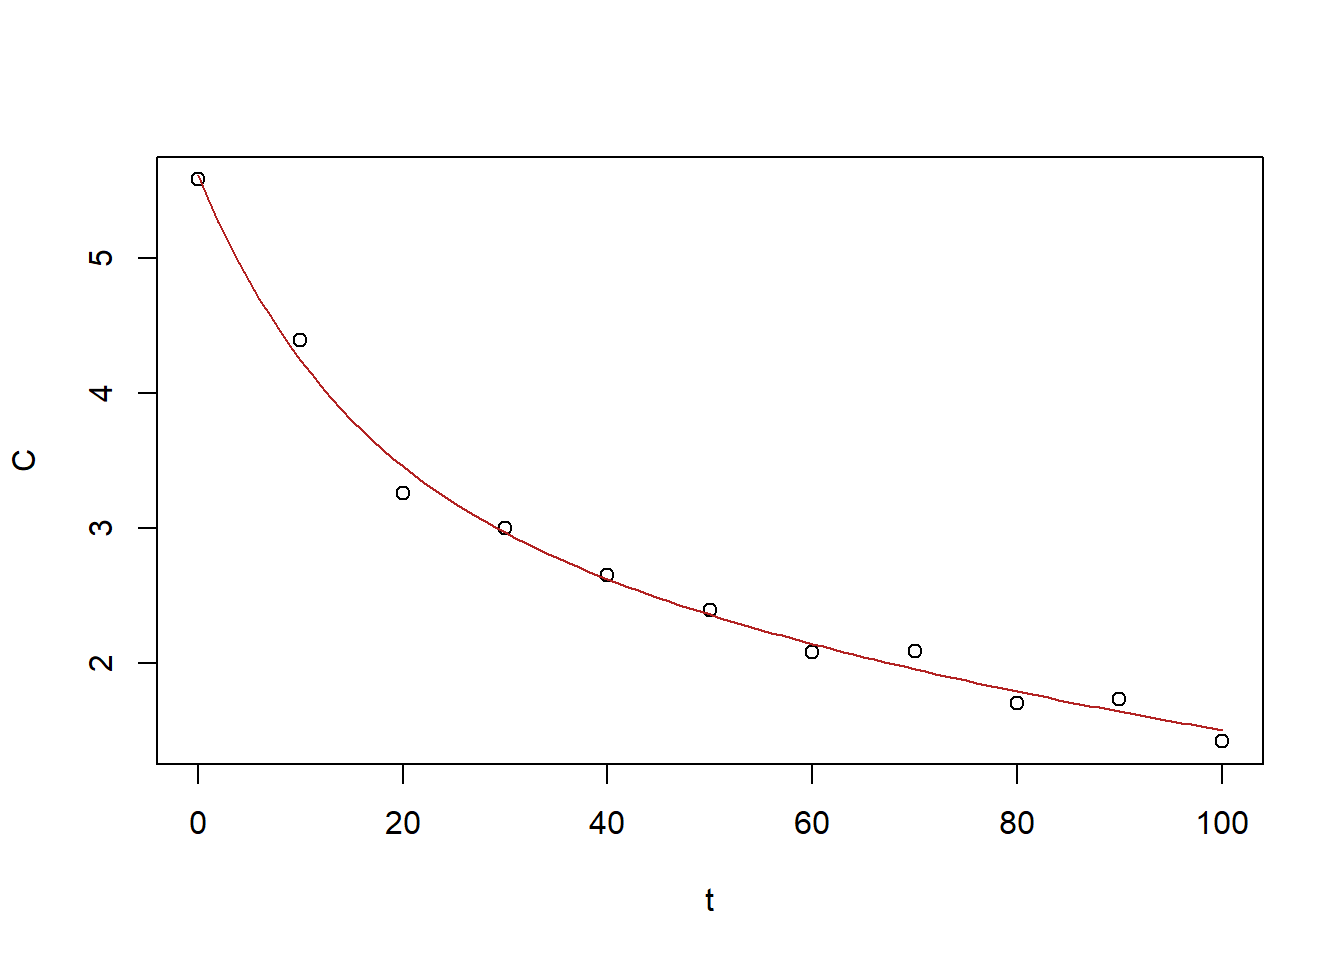 Fitted biexponential line of best fit as the solution is superimposed.